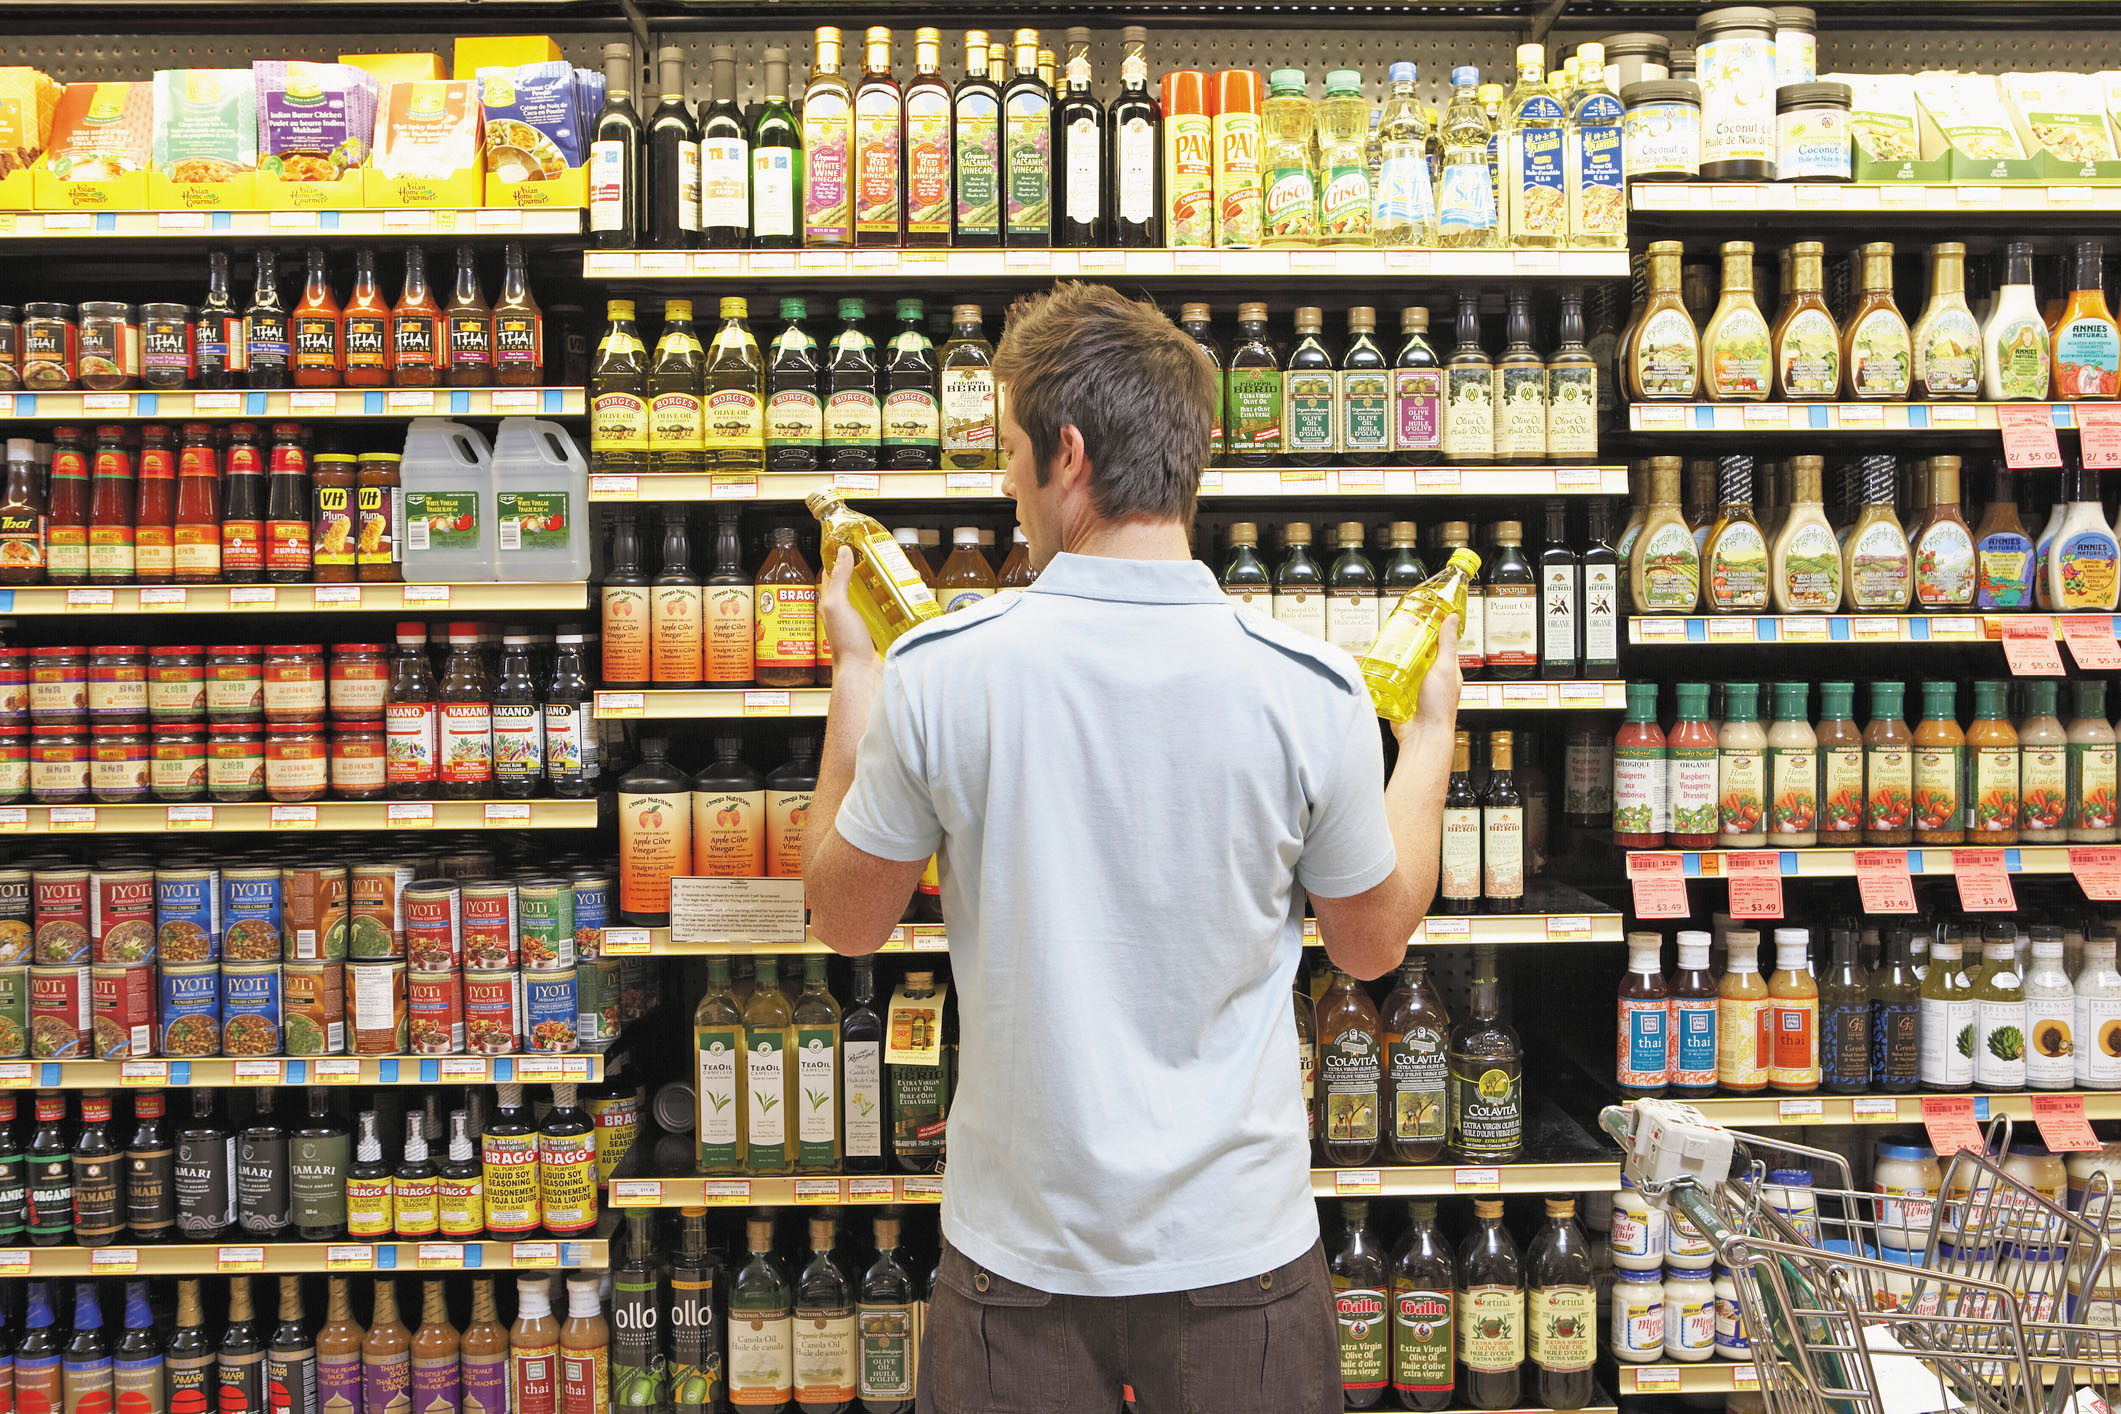 photo of a man viewed from behind as he stands in a supermarket aisle and compares two bottles of cooking oil, one in each hand